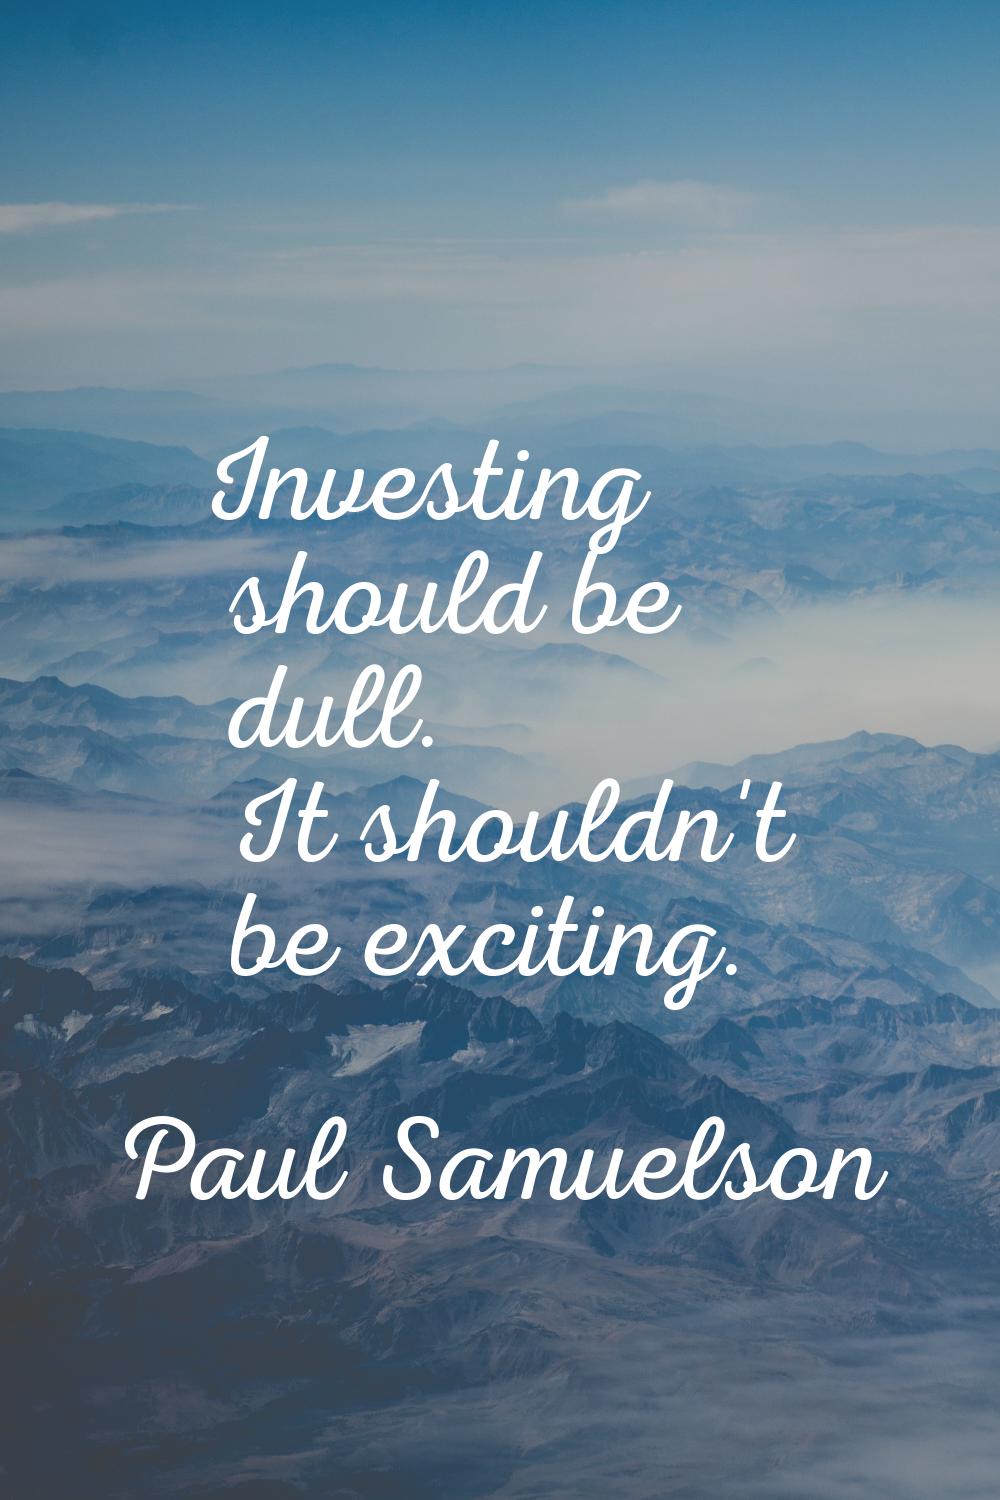 Investing should be dull. It shouldn't be exciting.